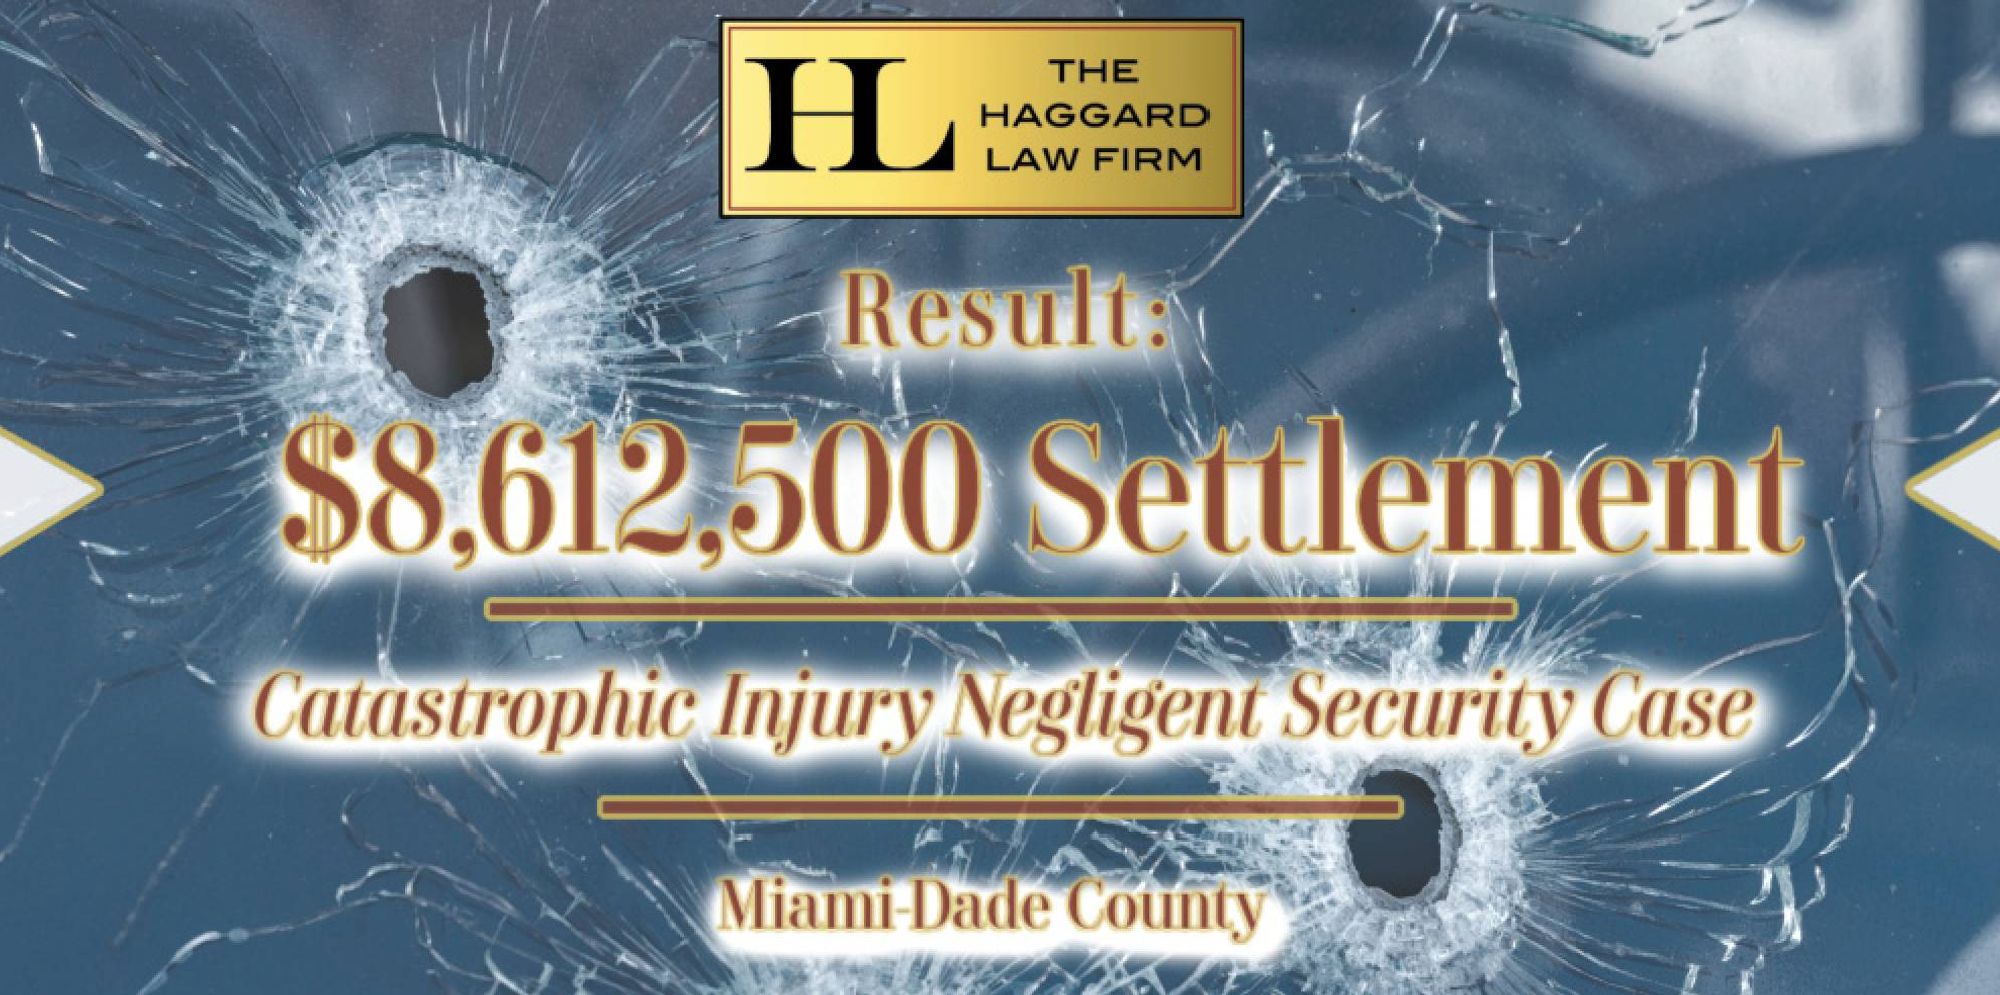 $8.6 Million Settlement in Catastrophic Injury Negligent Security Case